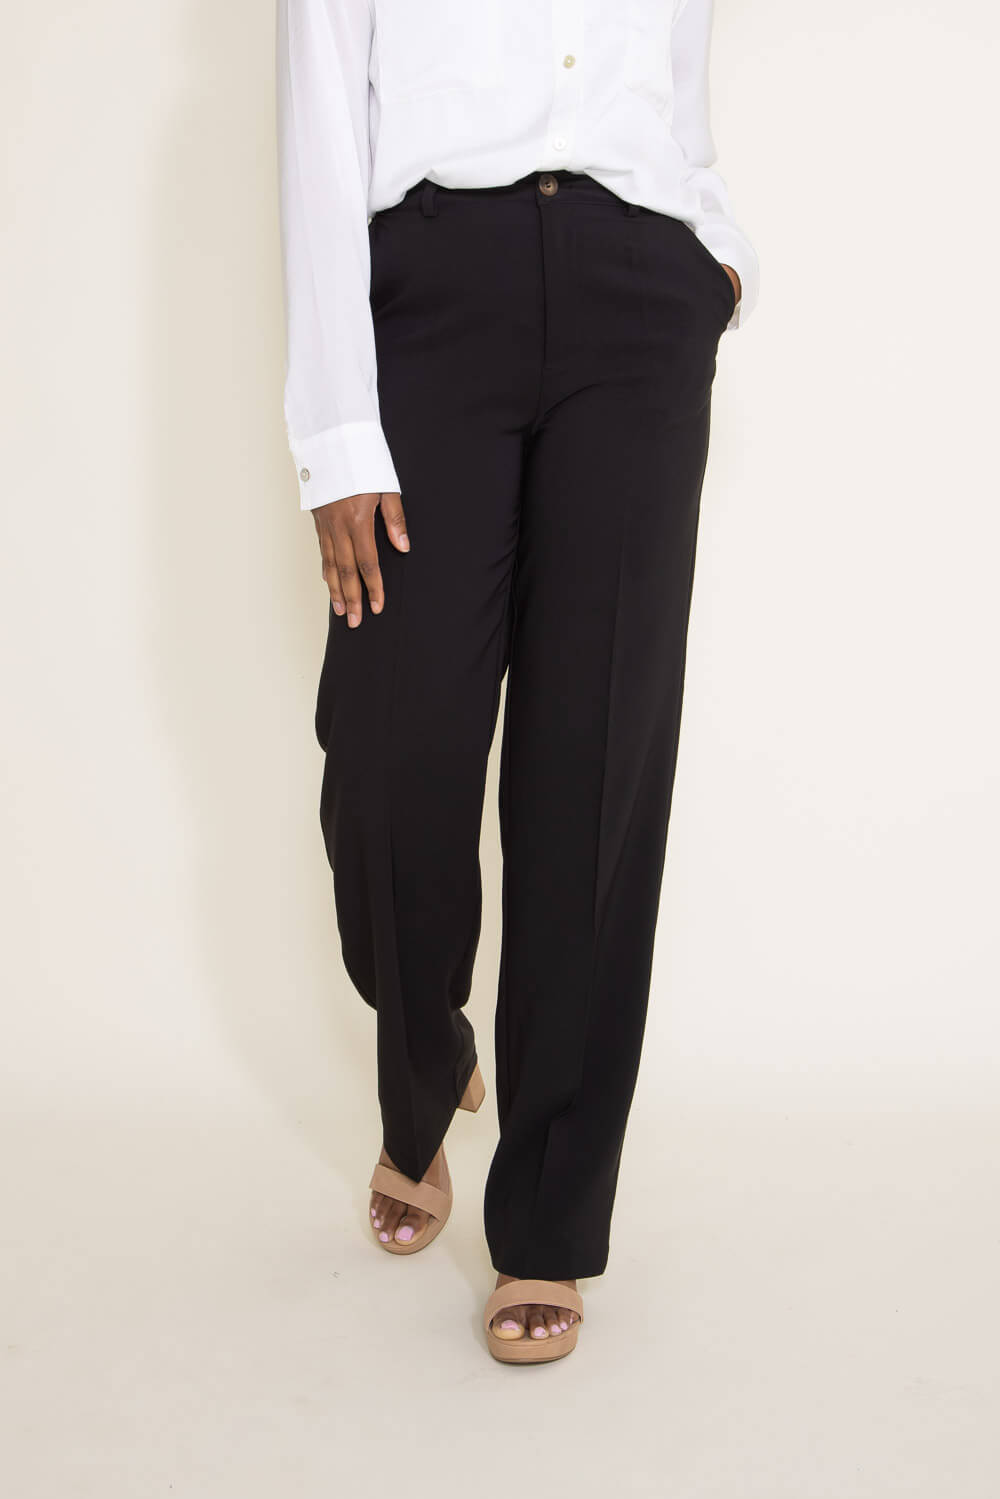 Cotton Ladies Trouser, Size : M, XL, Feature : Attractive Design,  Comfortable at Rs 200 / Piece in Madurai